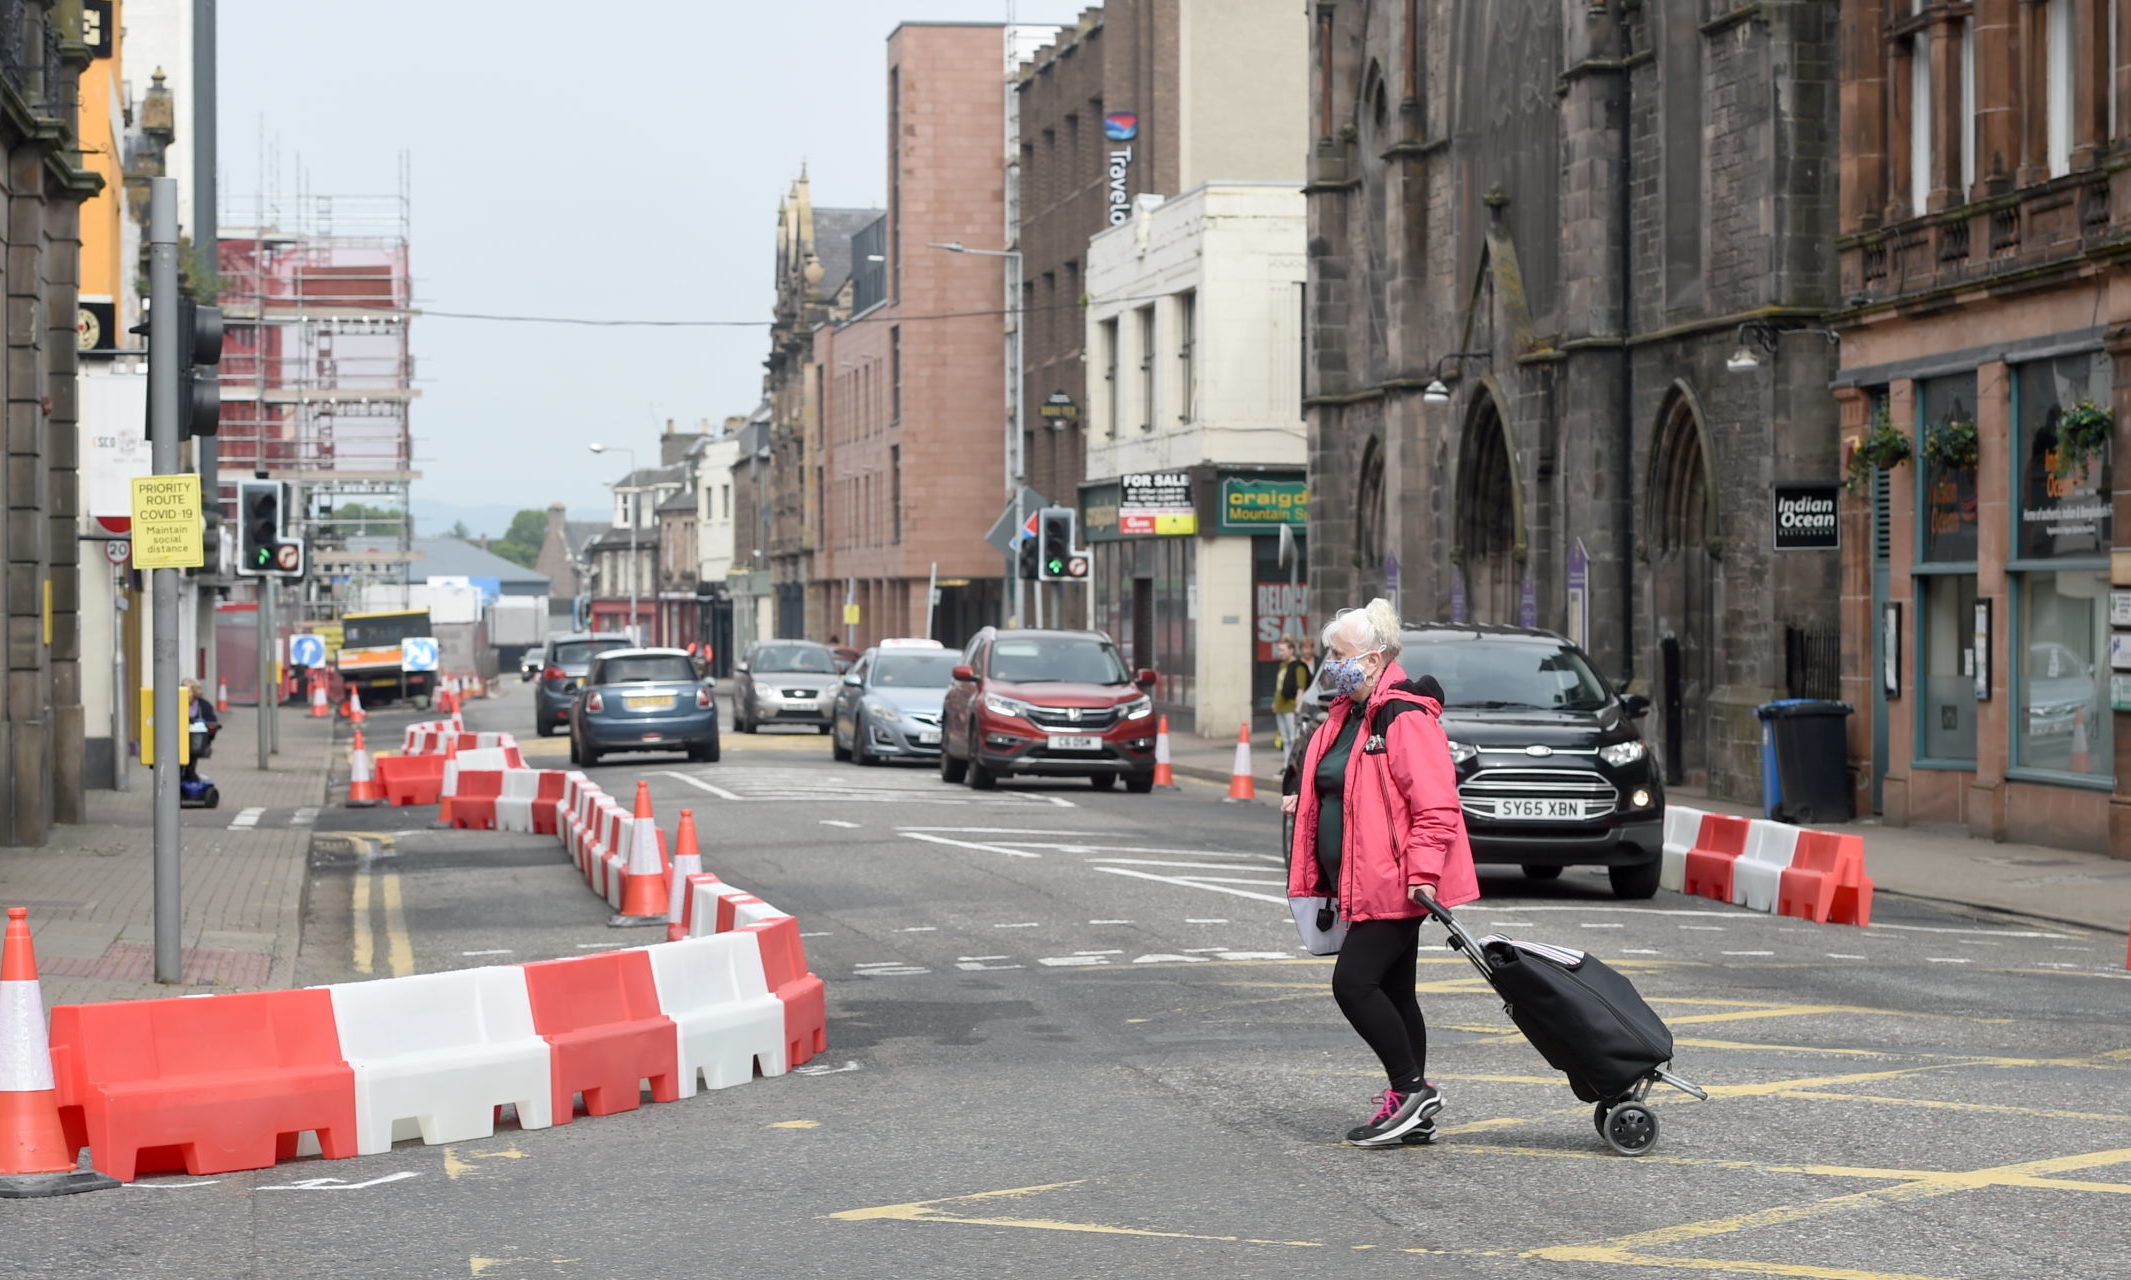 Work has been going on in Inverness city centre to narrow streets, as here in Academy Street. Pictures by Sandy McCook